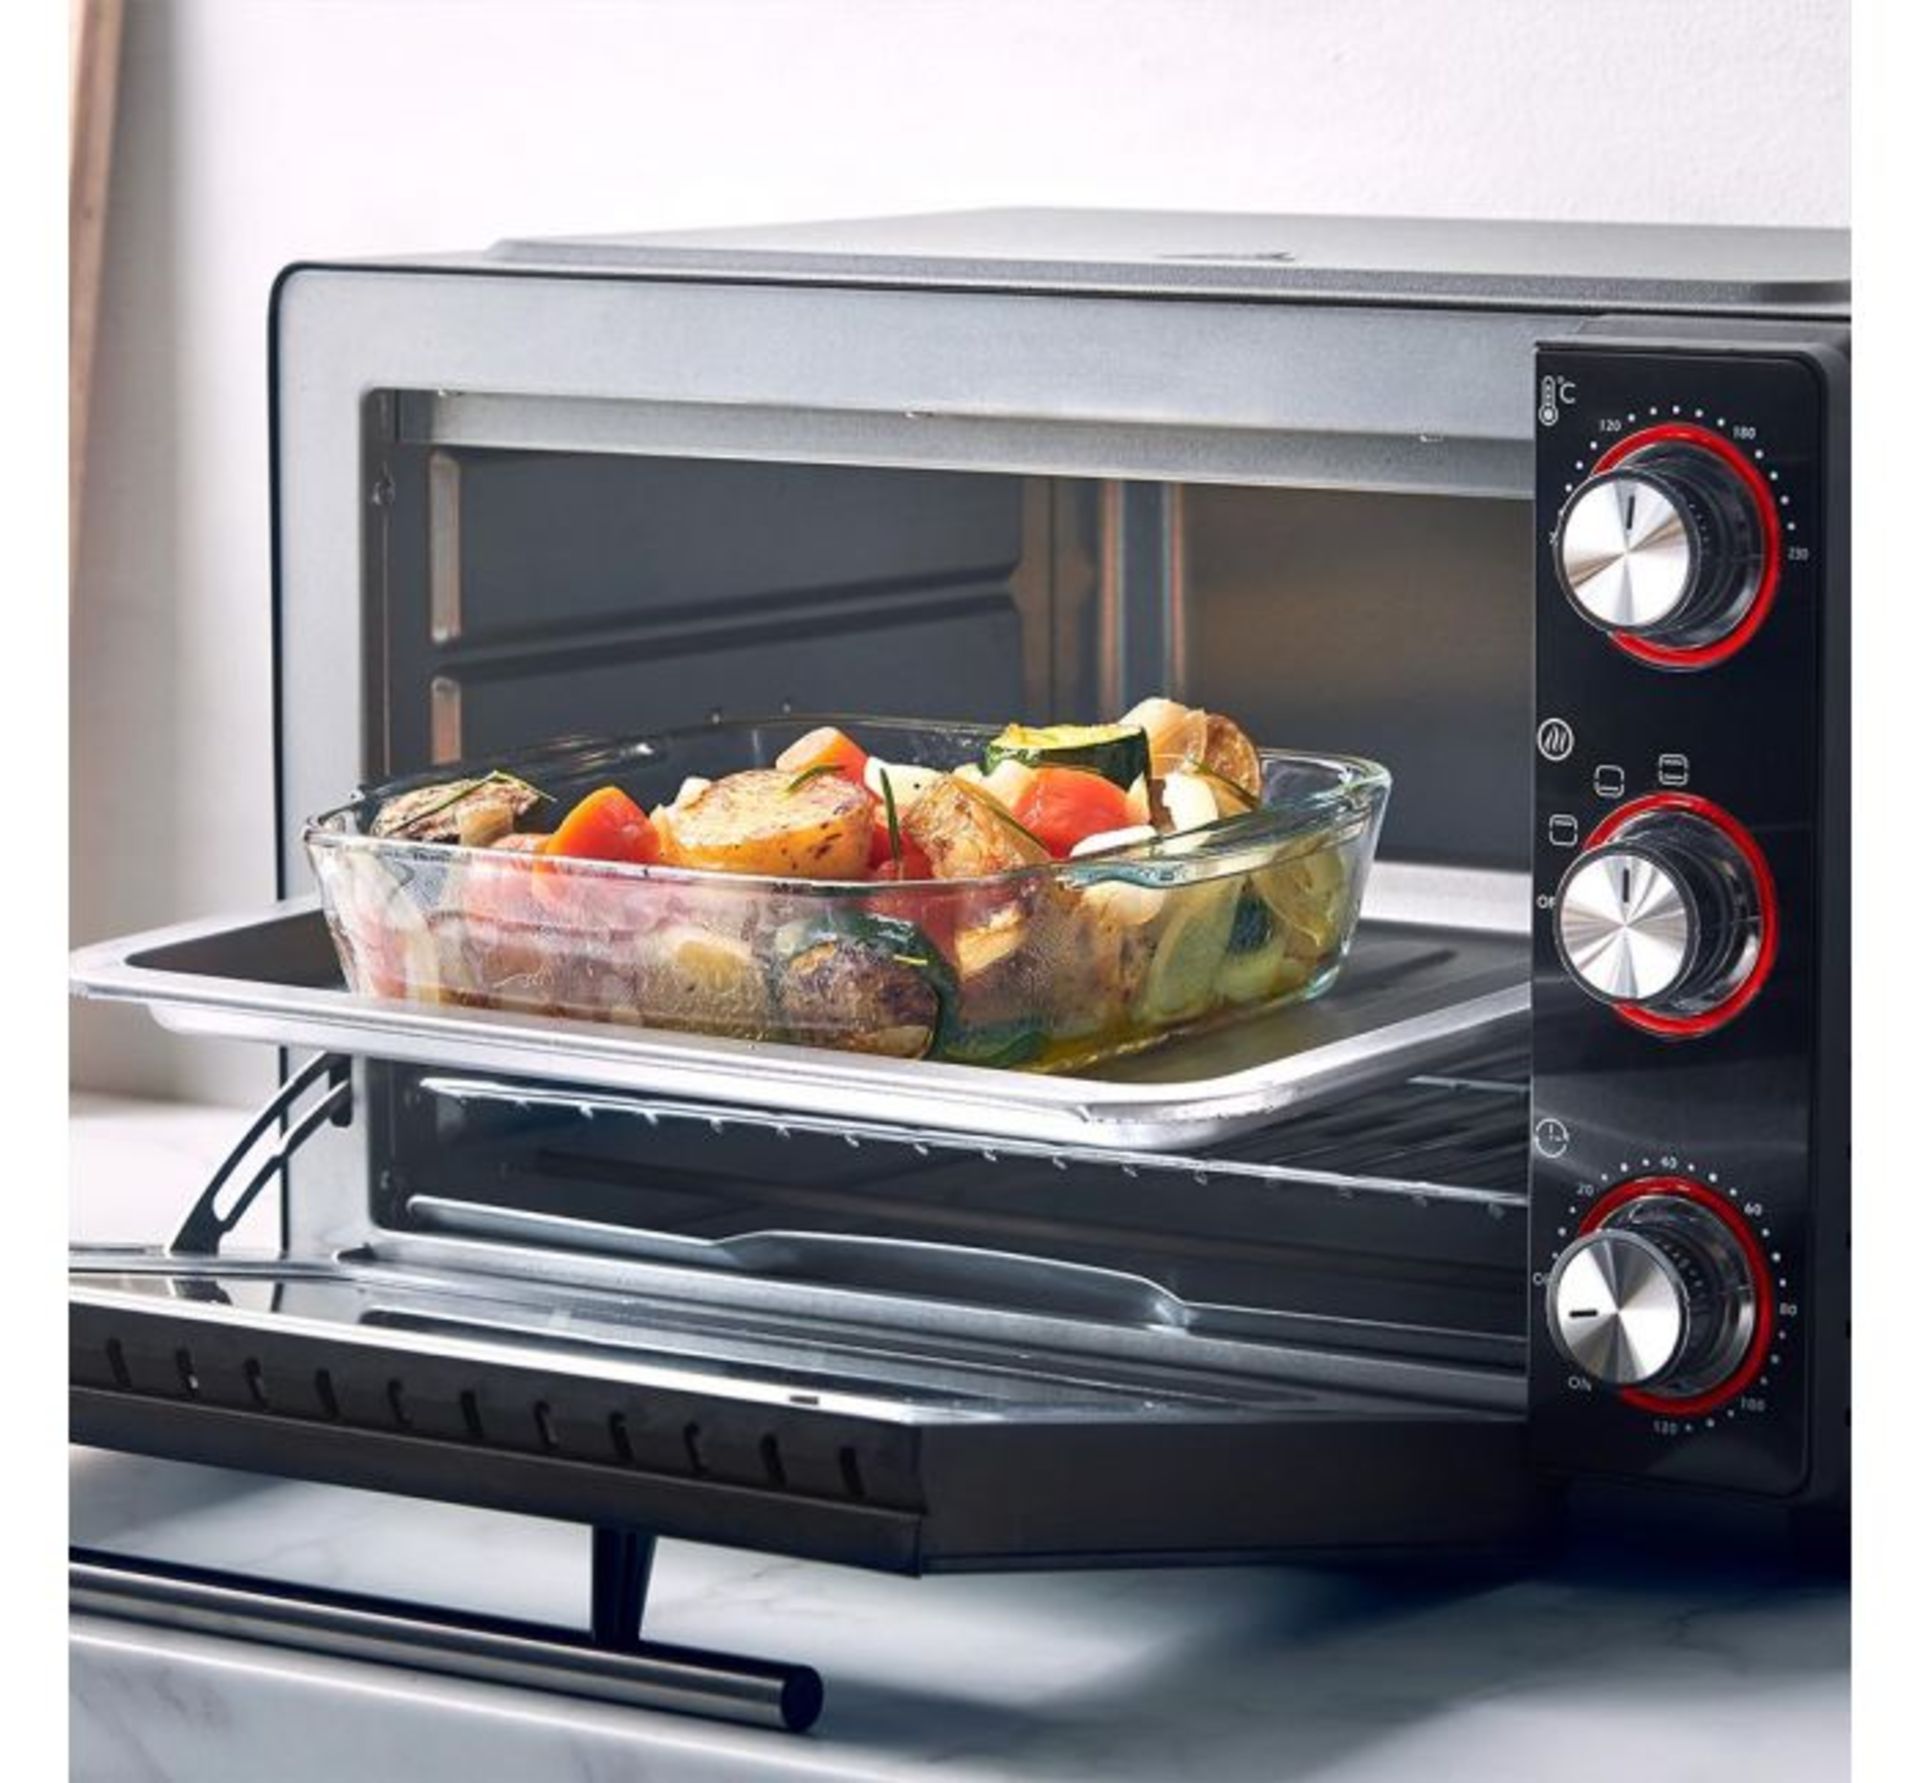 (AP94) 28L Mini Oven Cooker & Grill 28L capacity and unobtrusive size makes it ideal for space...